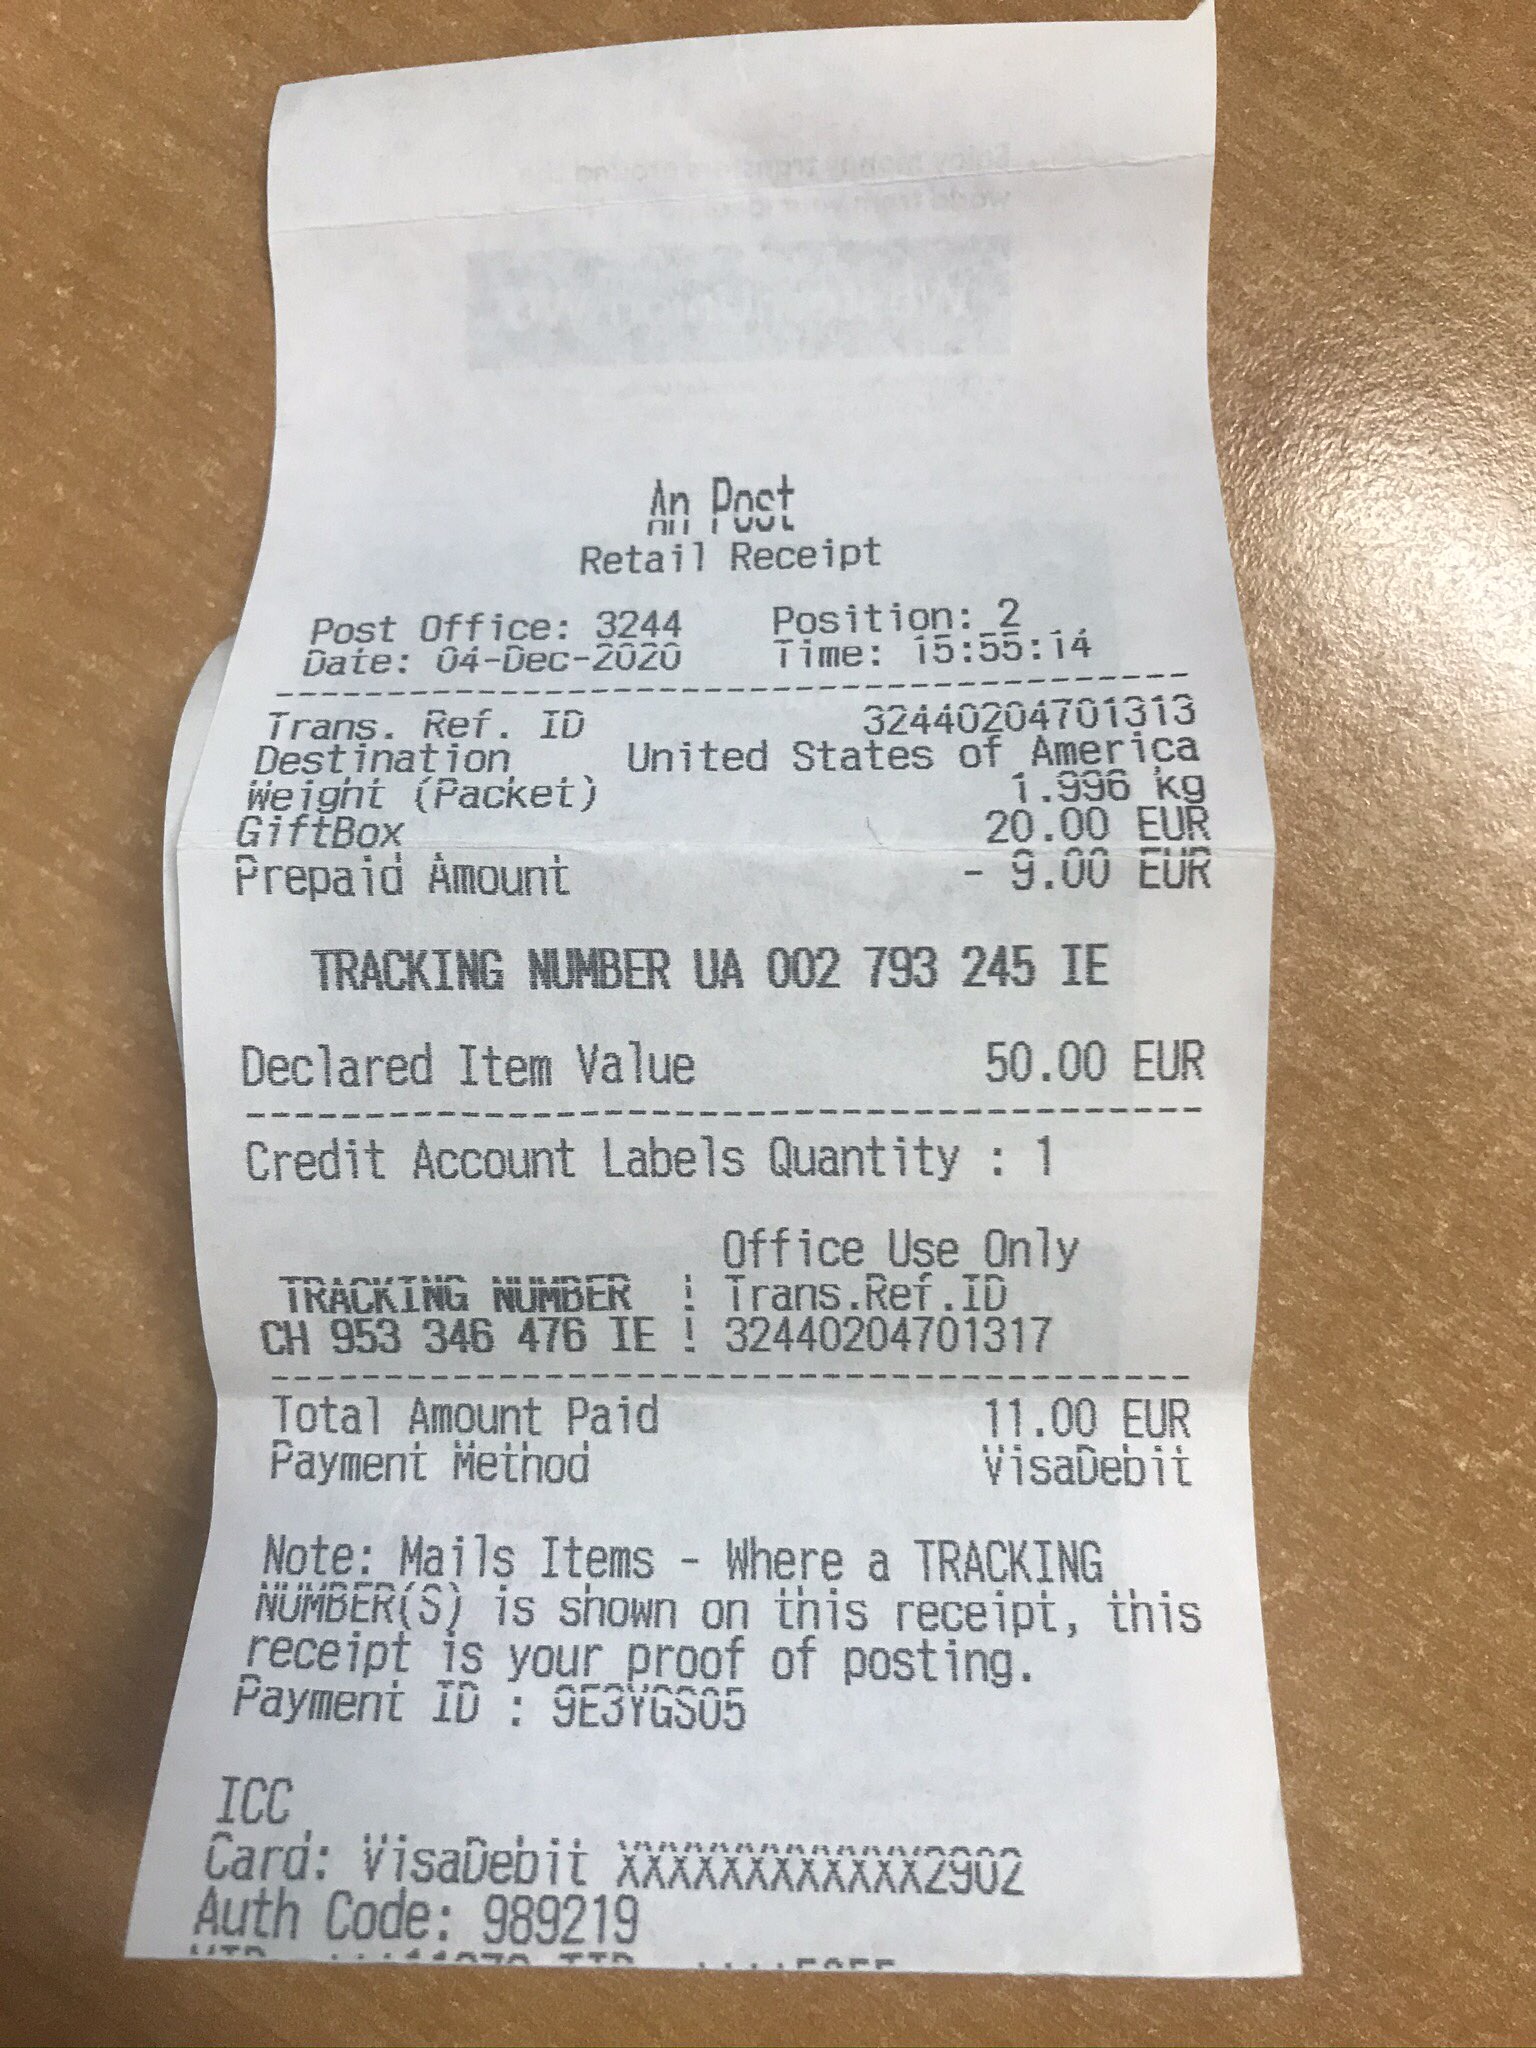 What is the tracking number on an post receipt?